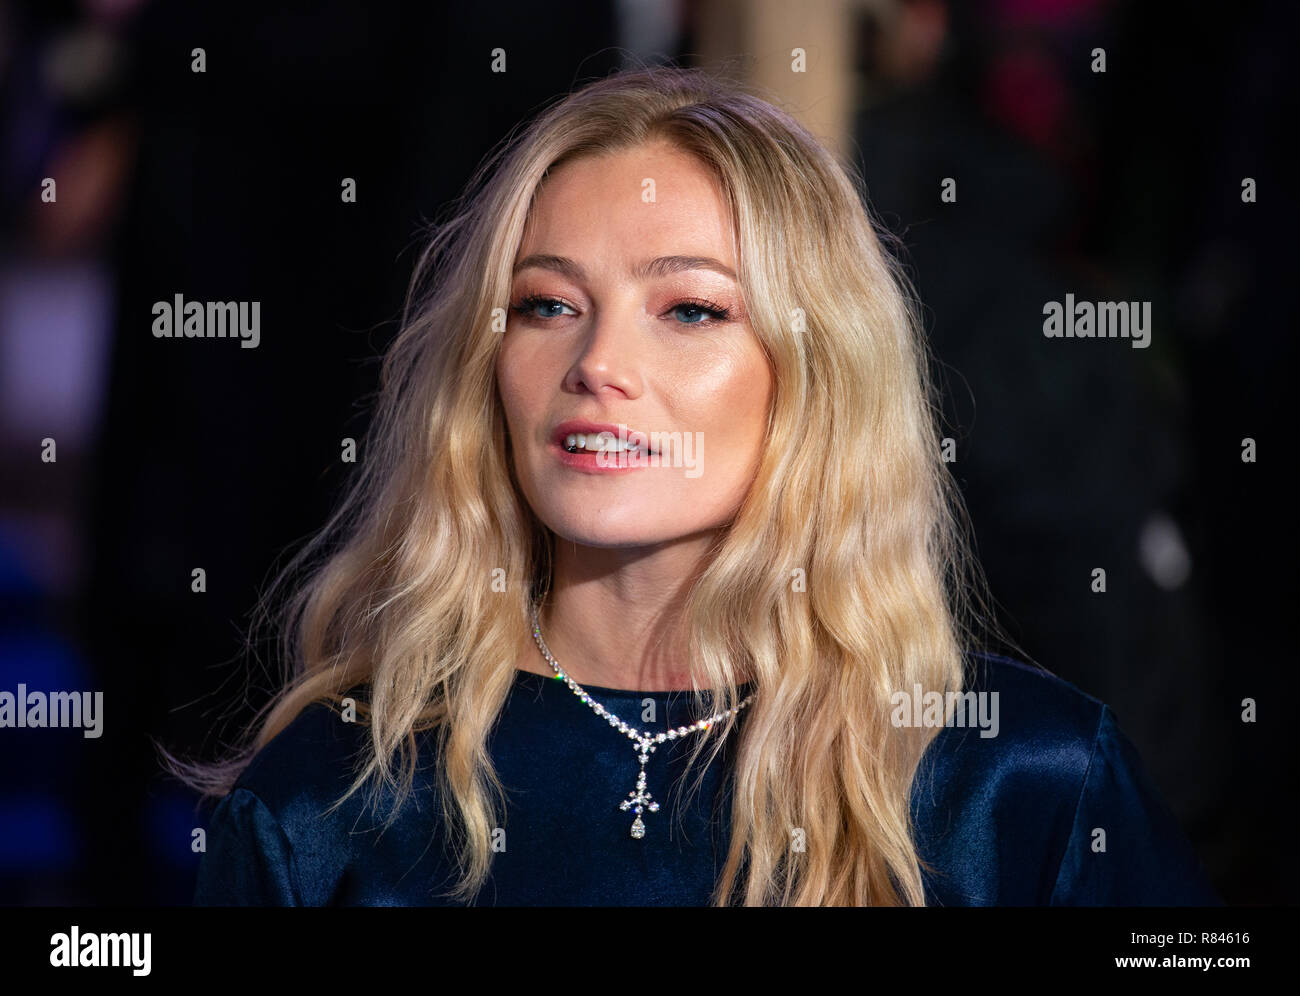 Clara Paget Actress Model And Aristocrat Arrives For The Premiere Of Mary Poppins Returns At The Royal Albert Hall Stock Photo Alamy